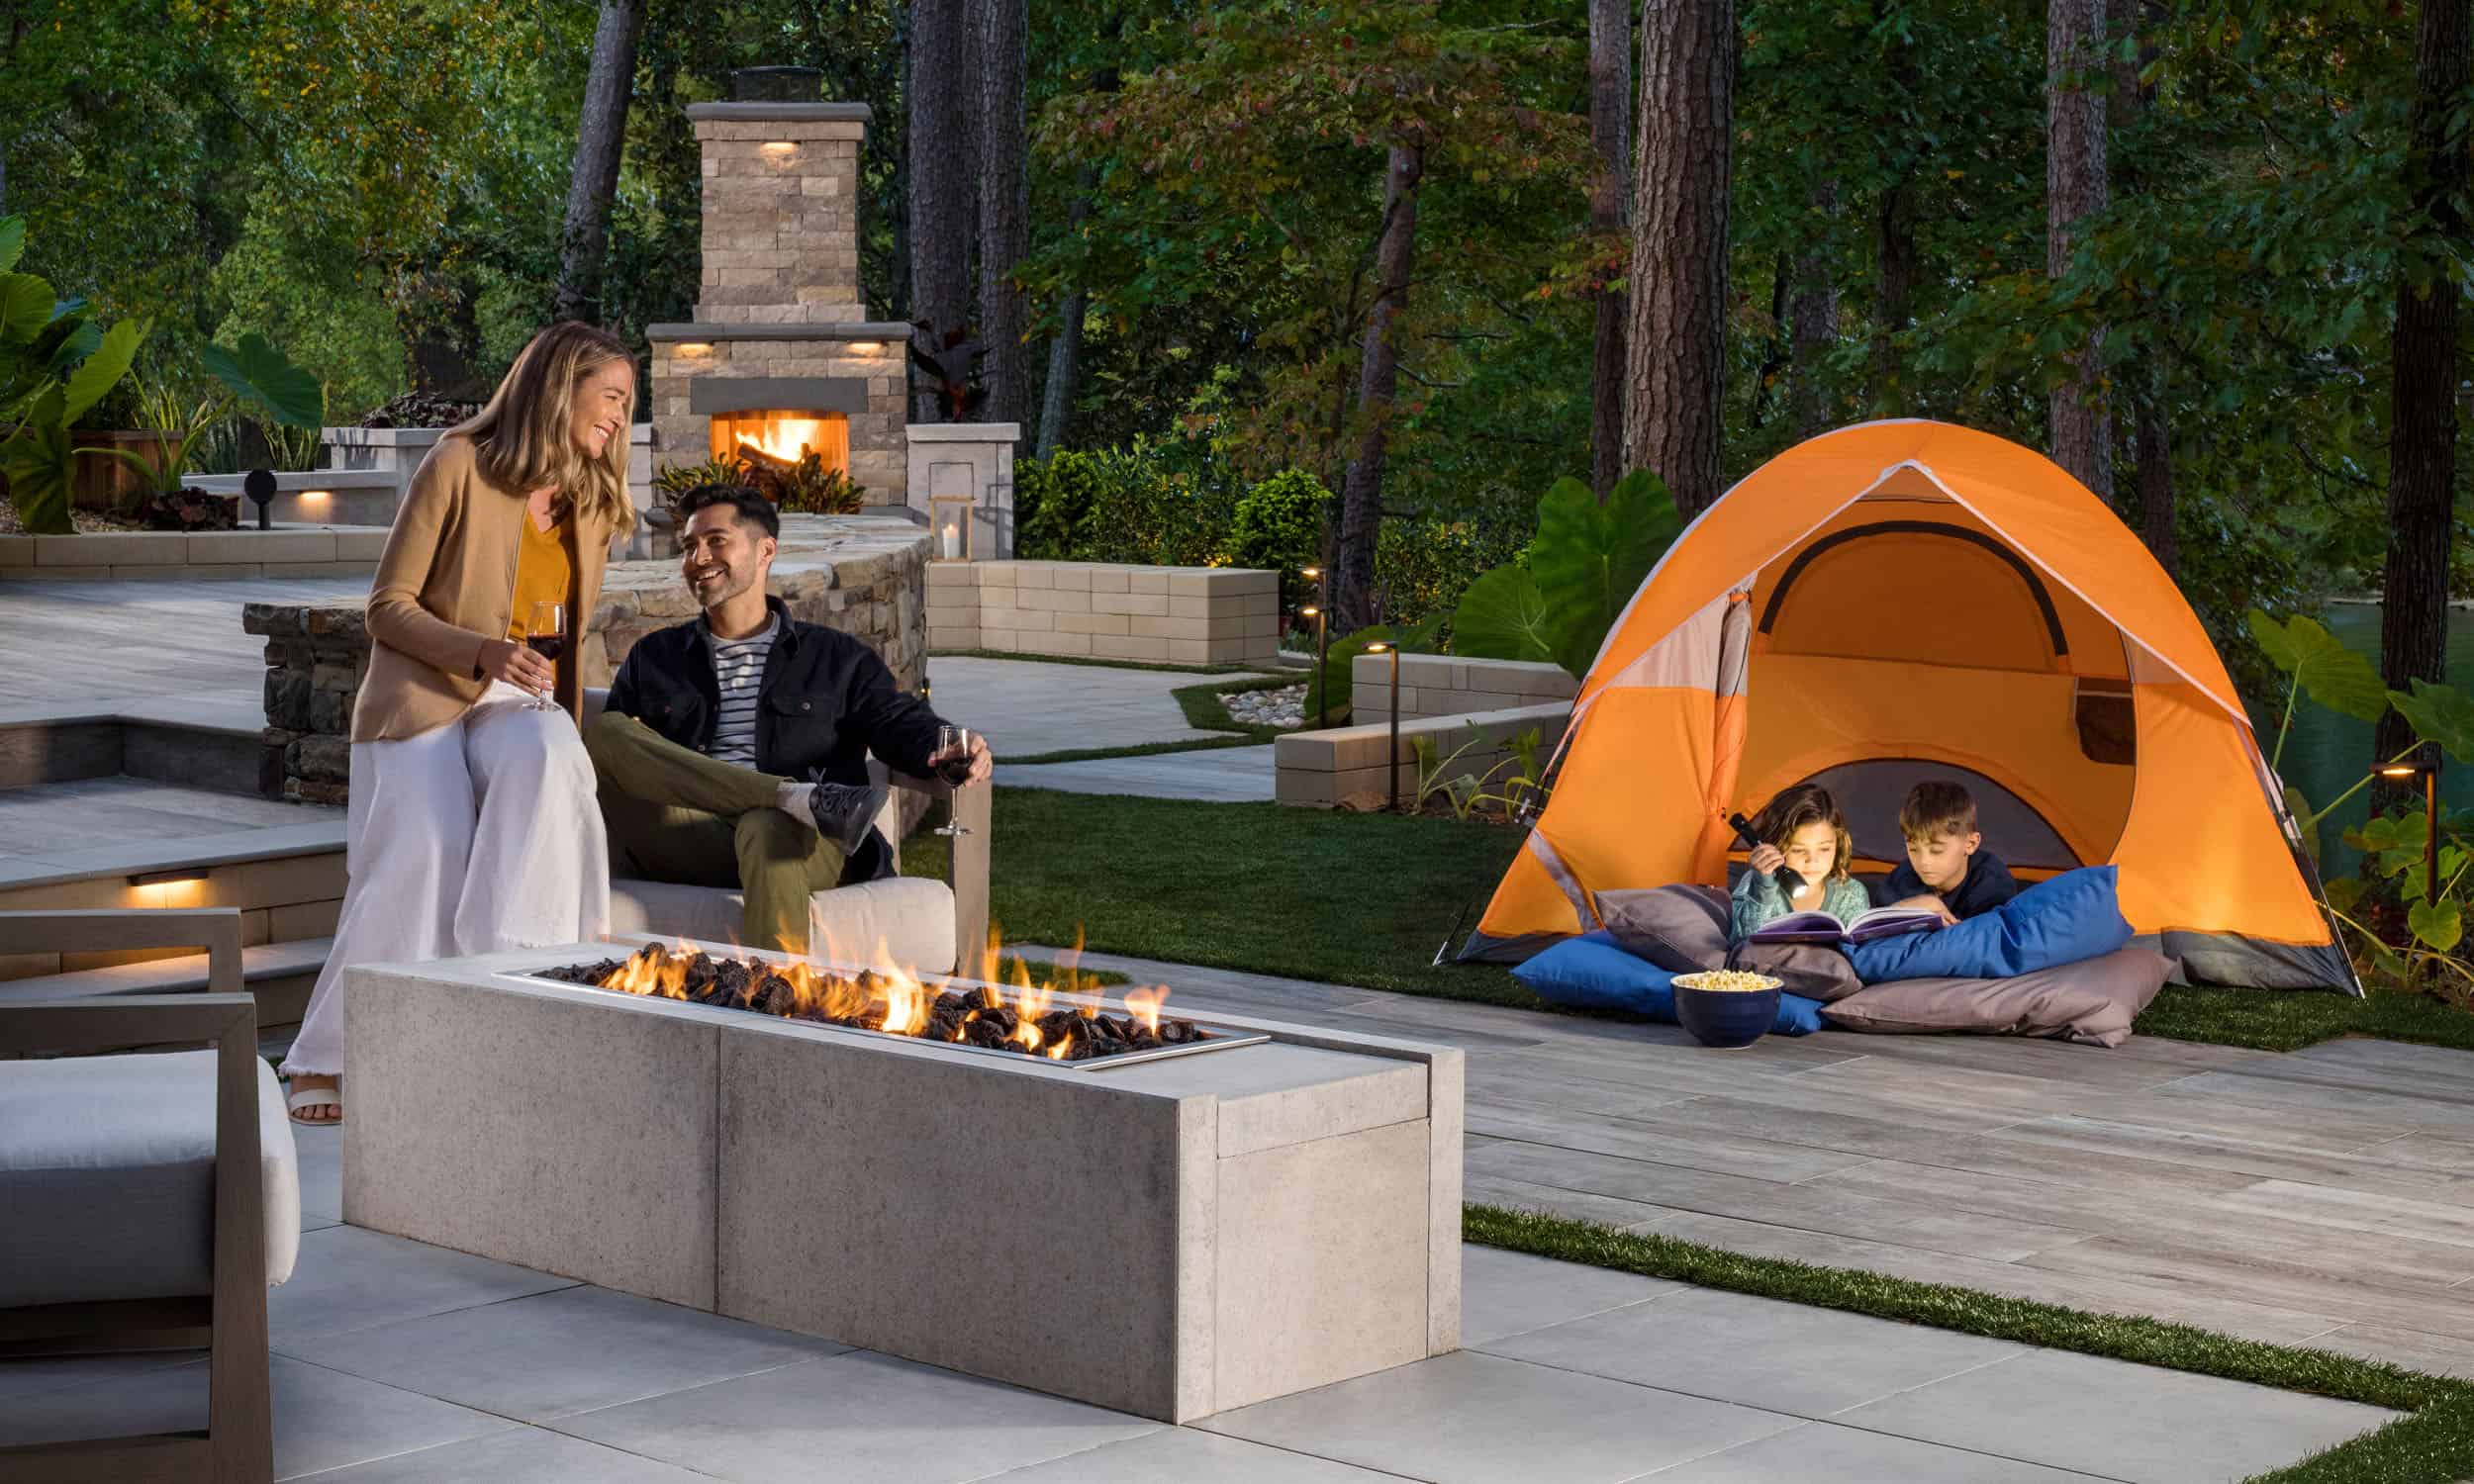 Family enjoying their Belgard outdoor living space. Mother and father sitting next to a fire pit while kids enjoy reading a book in a tent.